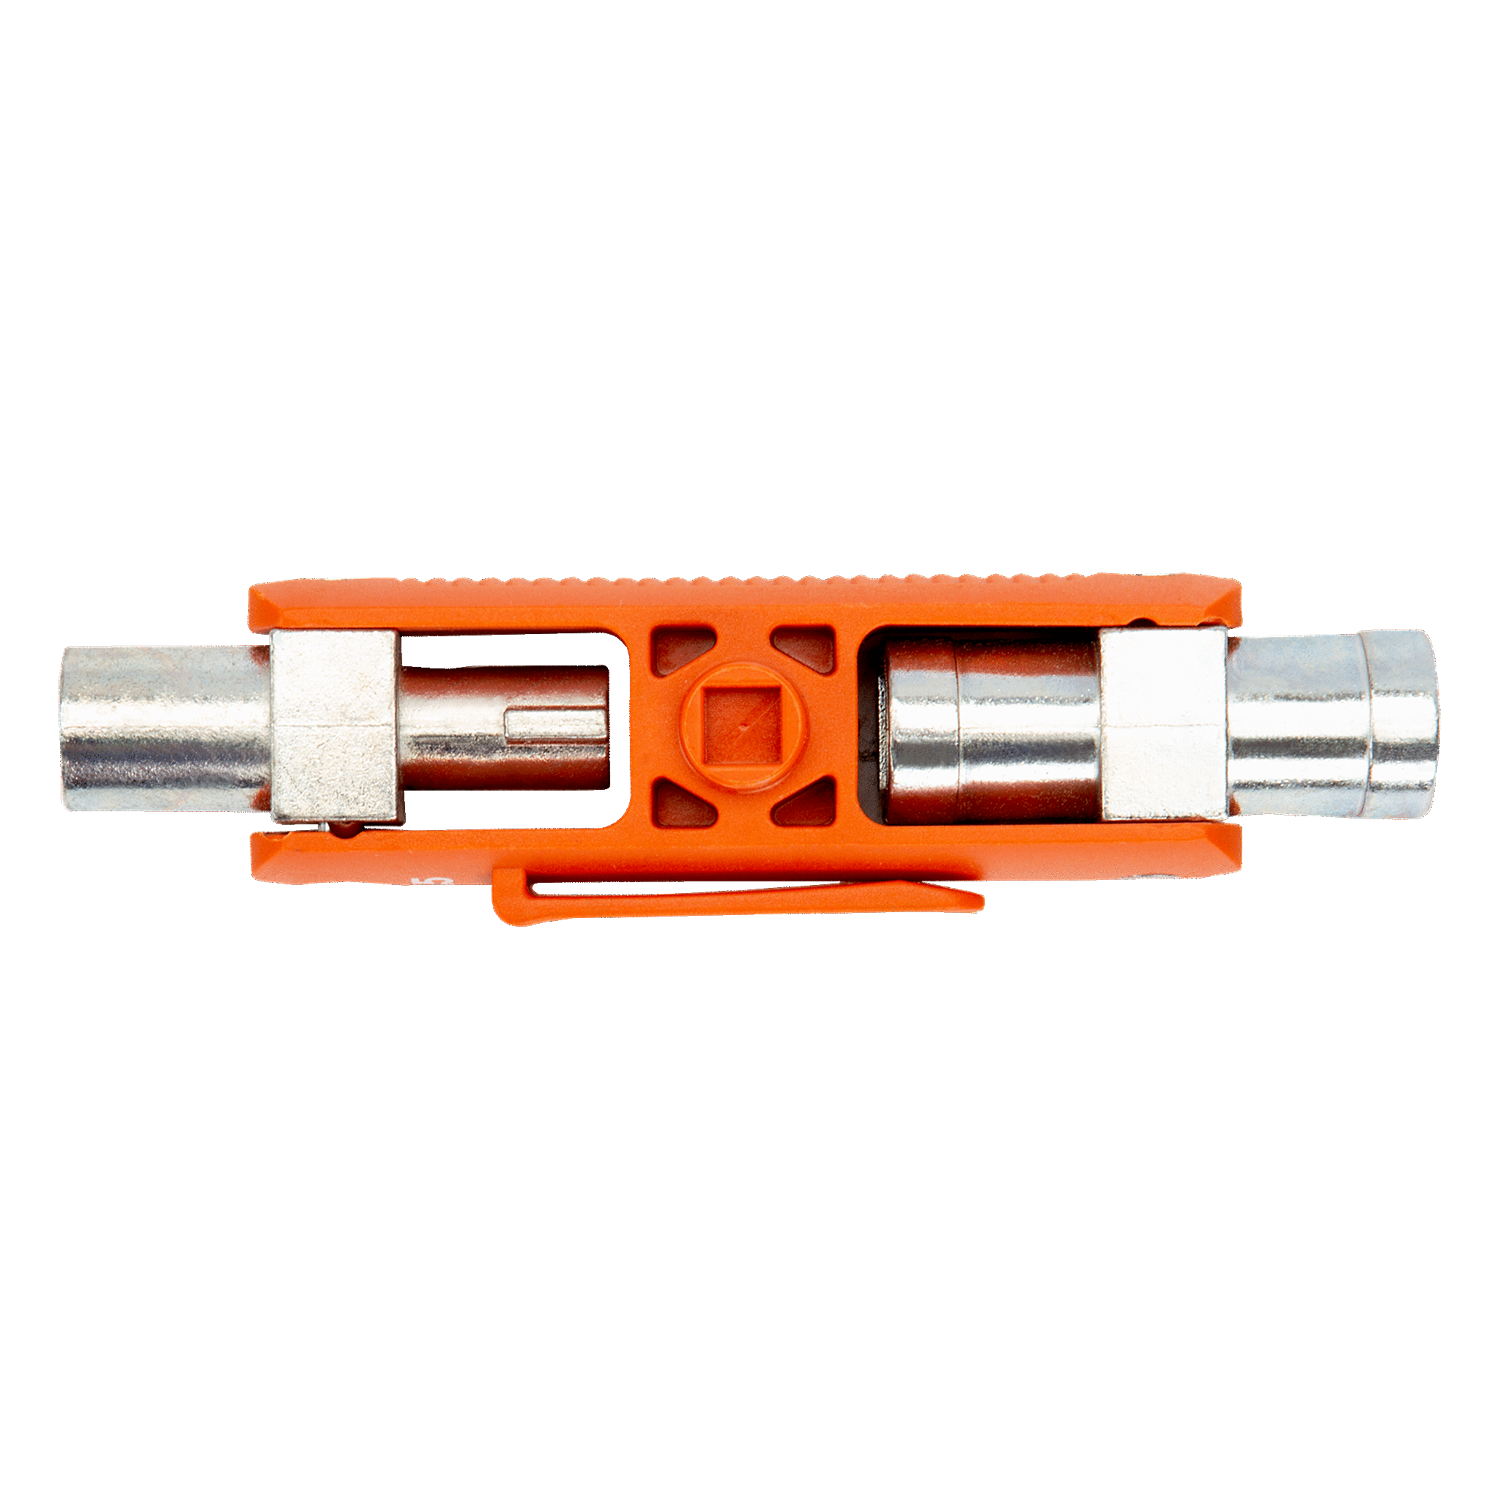 BAHCO MK5 5-IN-1 Switch Cabinet Wrench (BAHCO Tools) - Premium Cabinet Wrench from BAHCO - Shop now at Yew Aik.